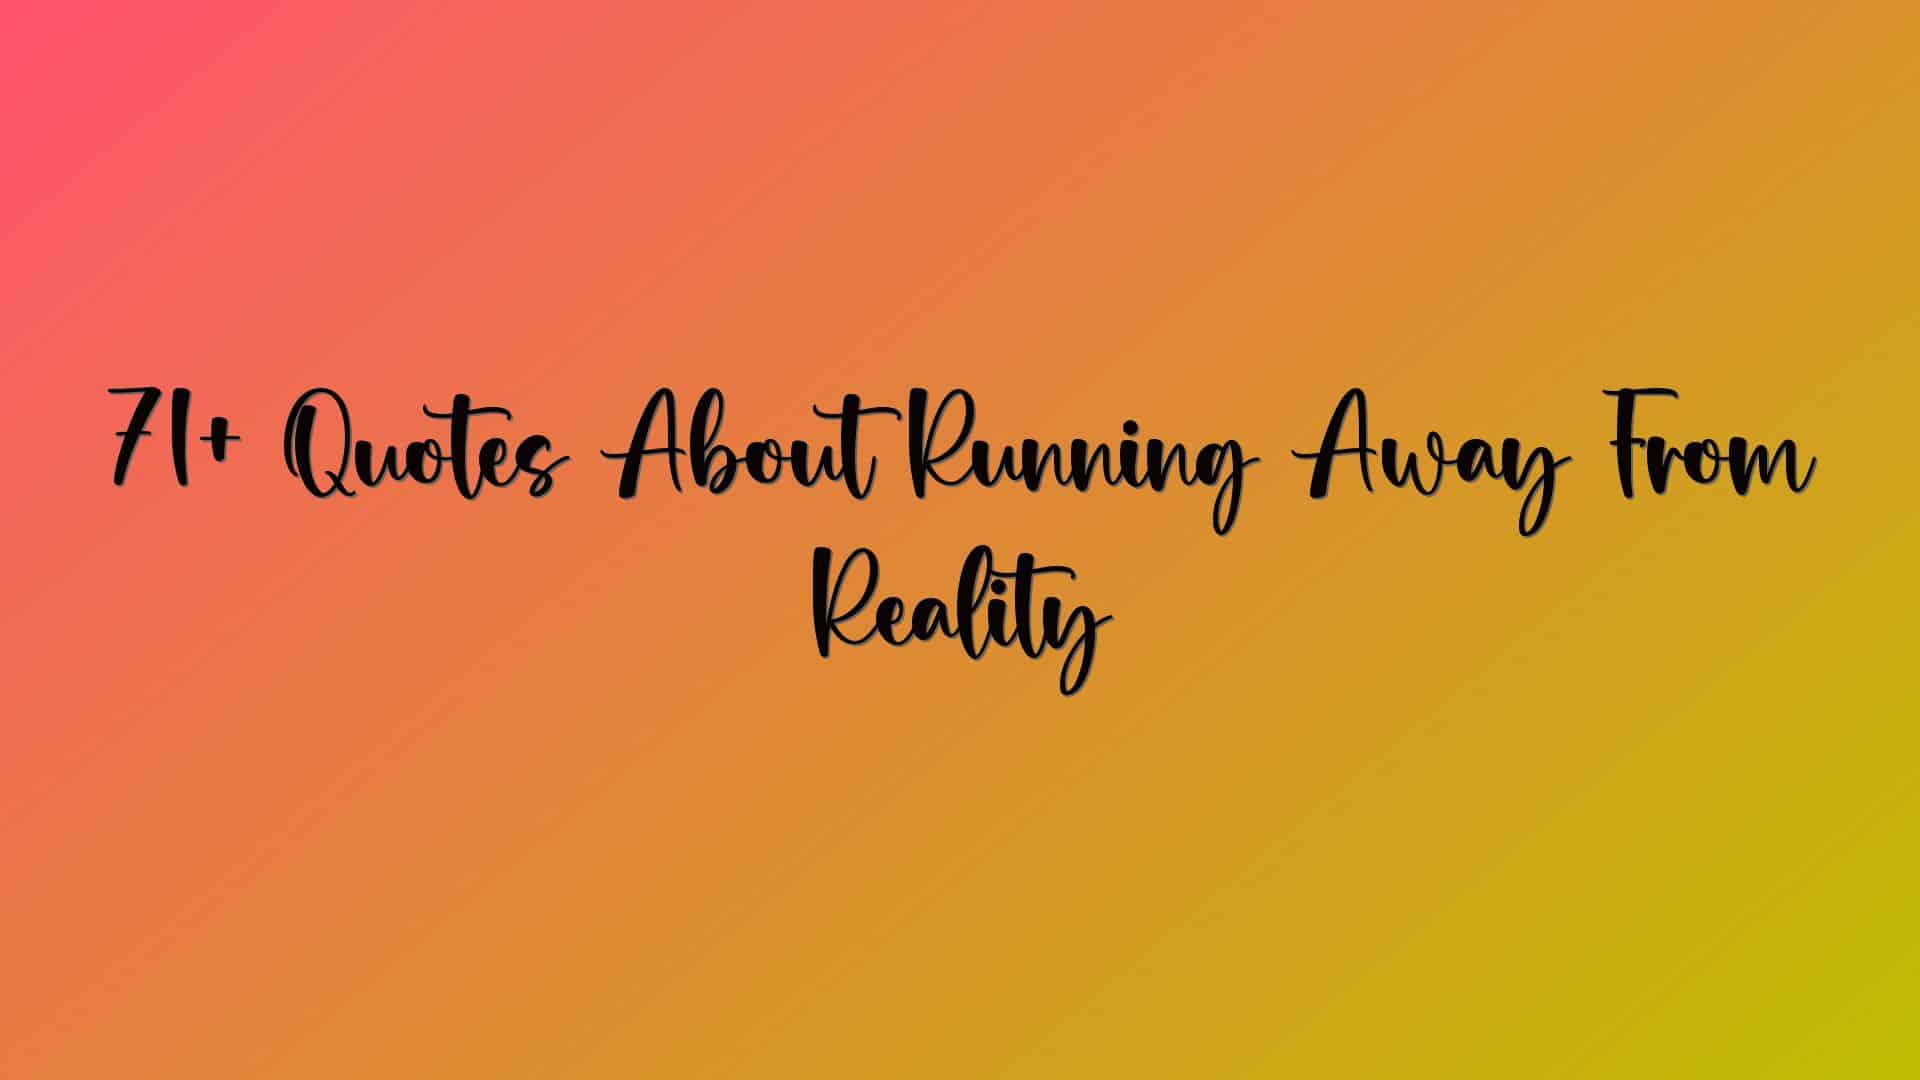 71+ Quotes About Running Away From Reality